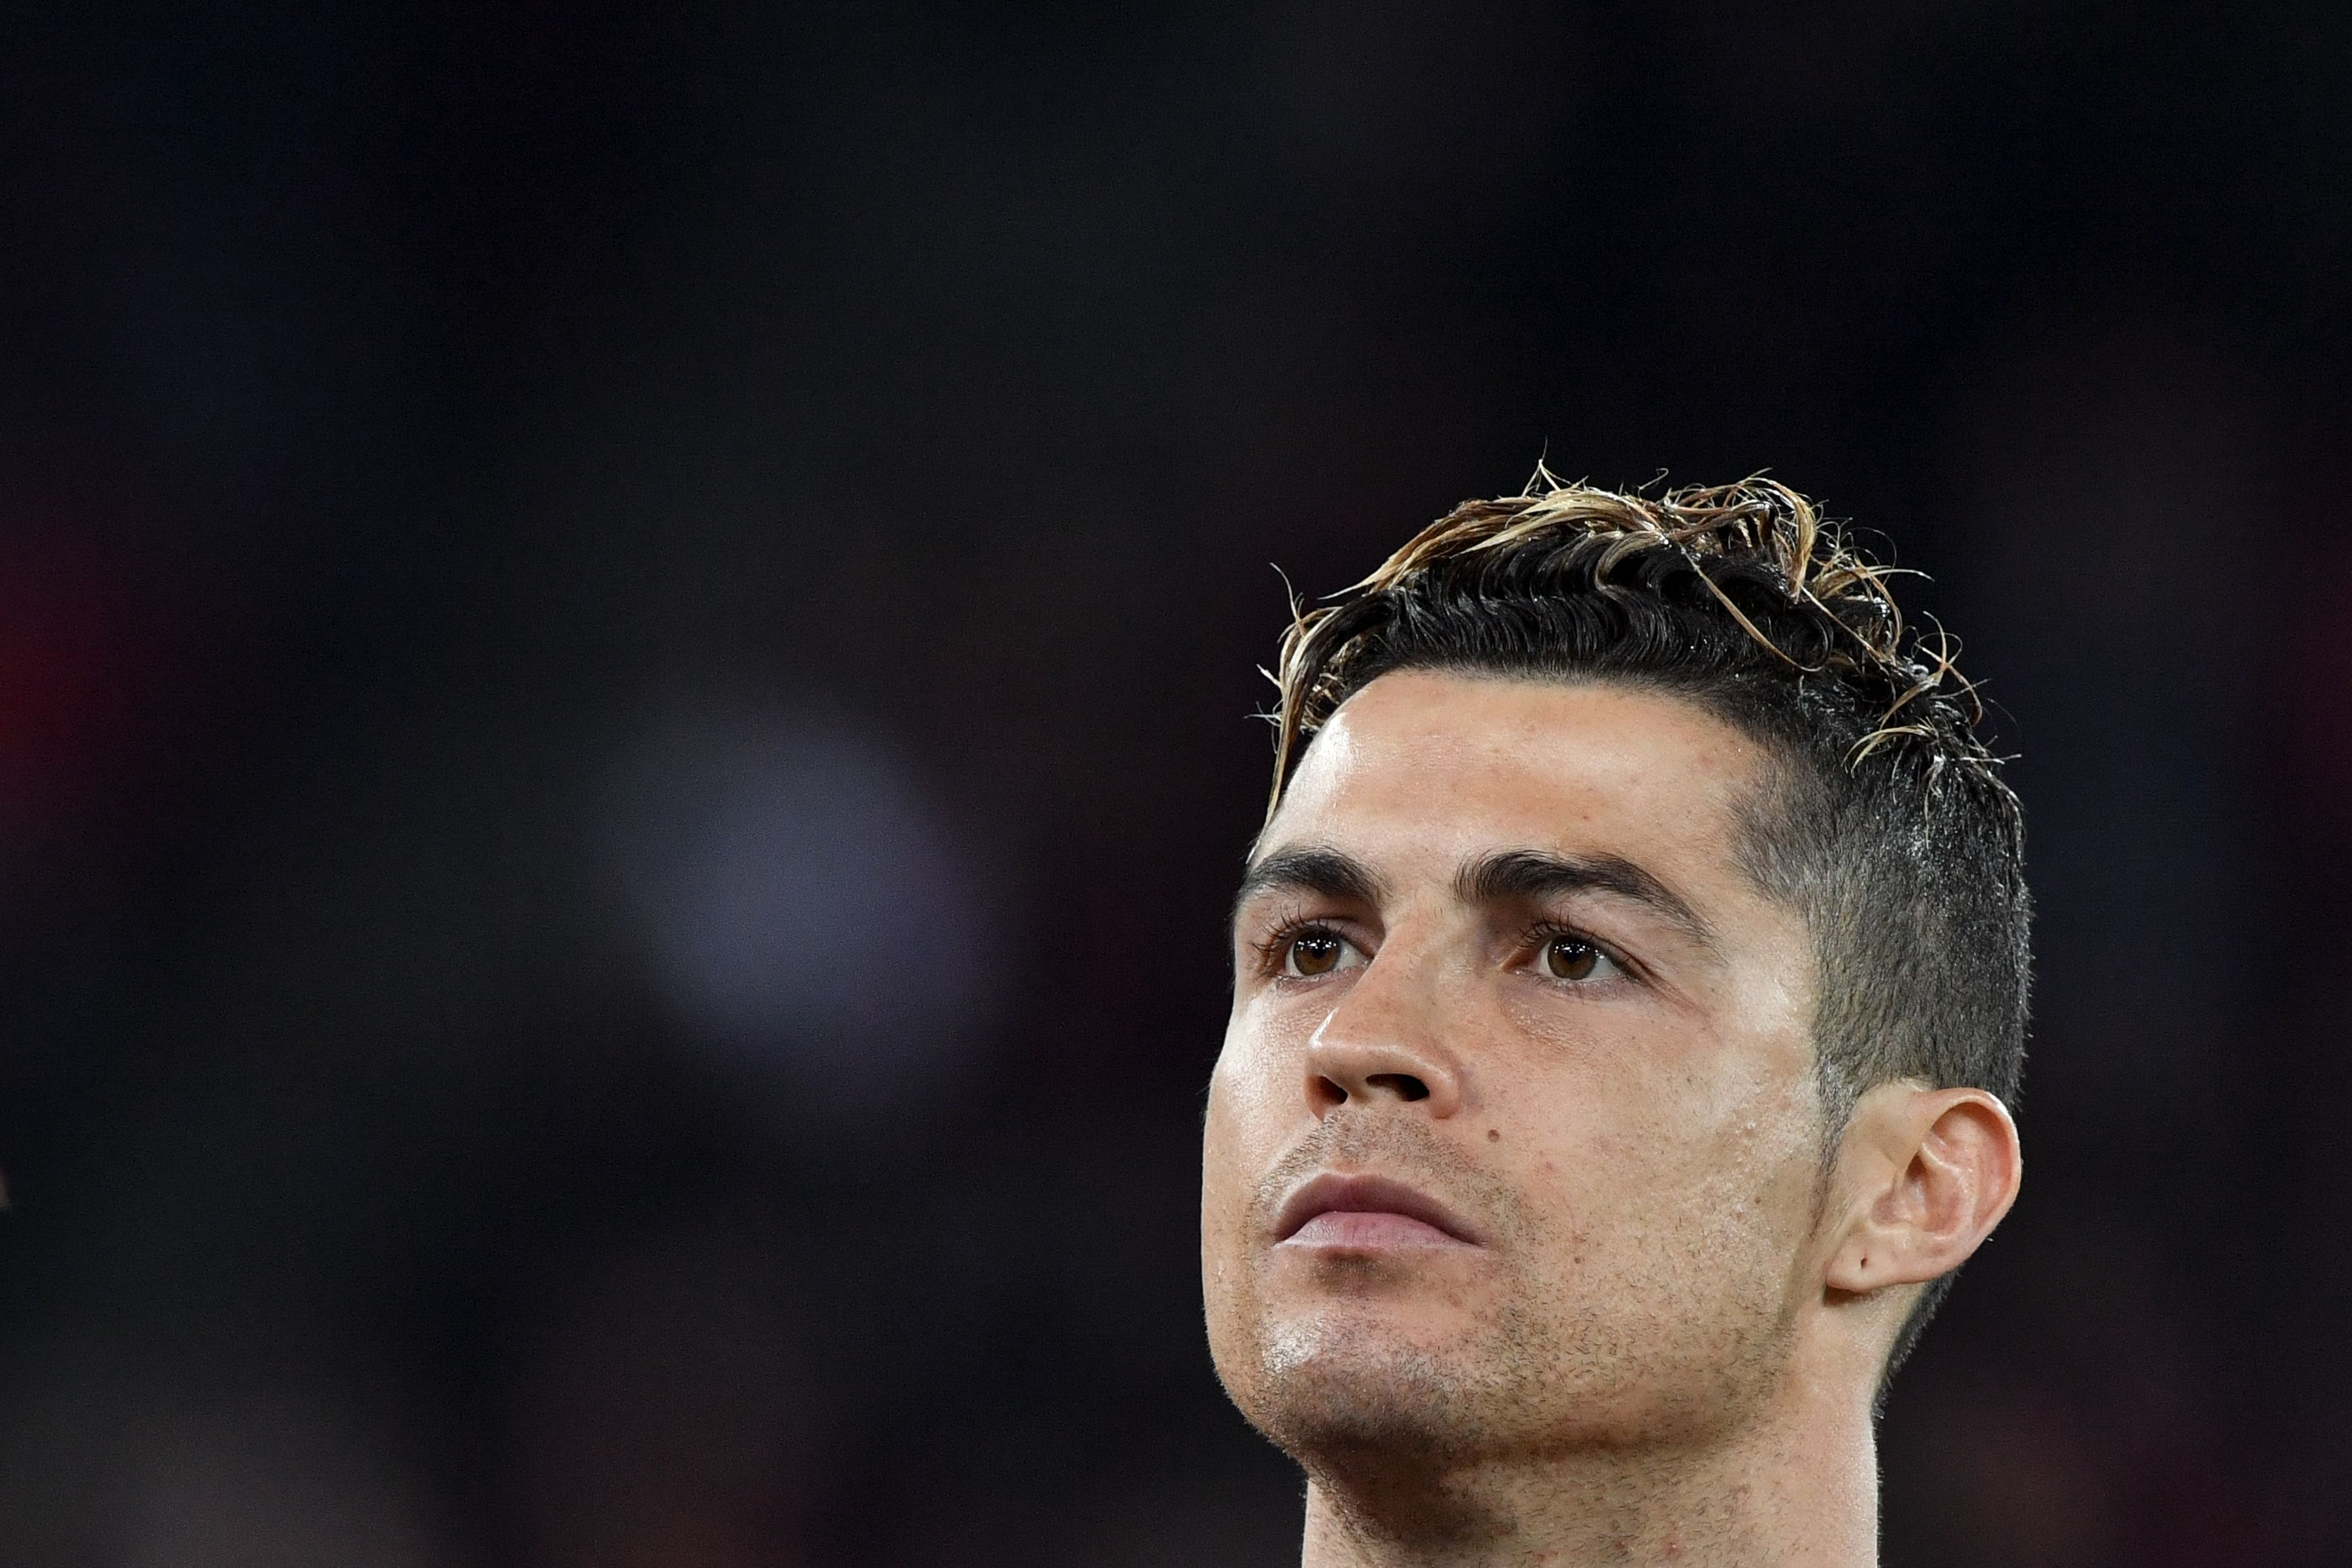 Portugal's forward Cristiano Ronaldo stands during the national anthems prior to an international friendly football match between Portugal and Egypt at Letzigrund stadium in Zurich on March 23, 2018. / AFP PHOTO / Fabrice COFFRINI        (Photo credit should read FABRICE COFFRINI/AFP/Getty Images)